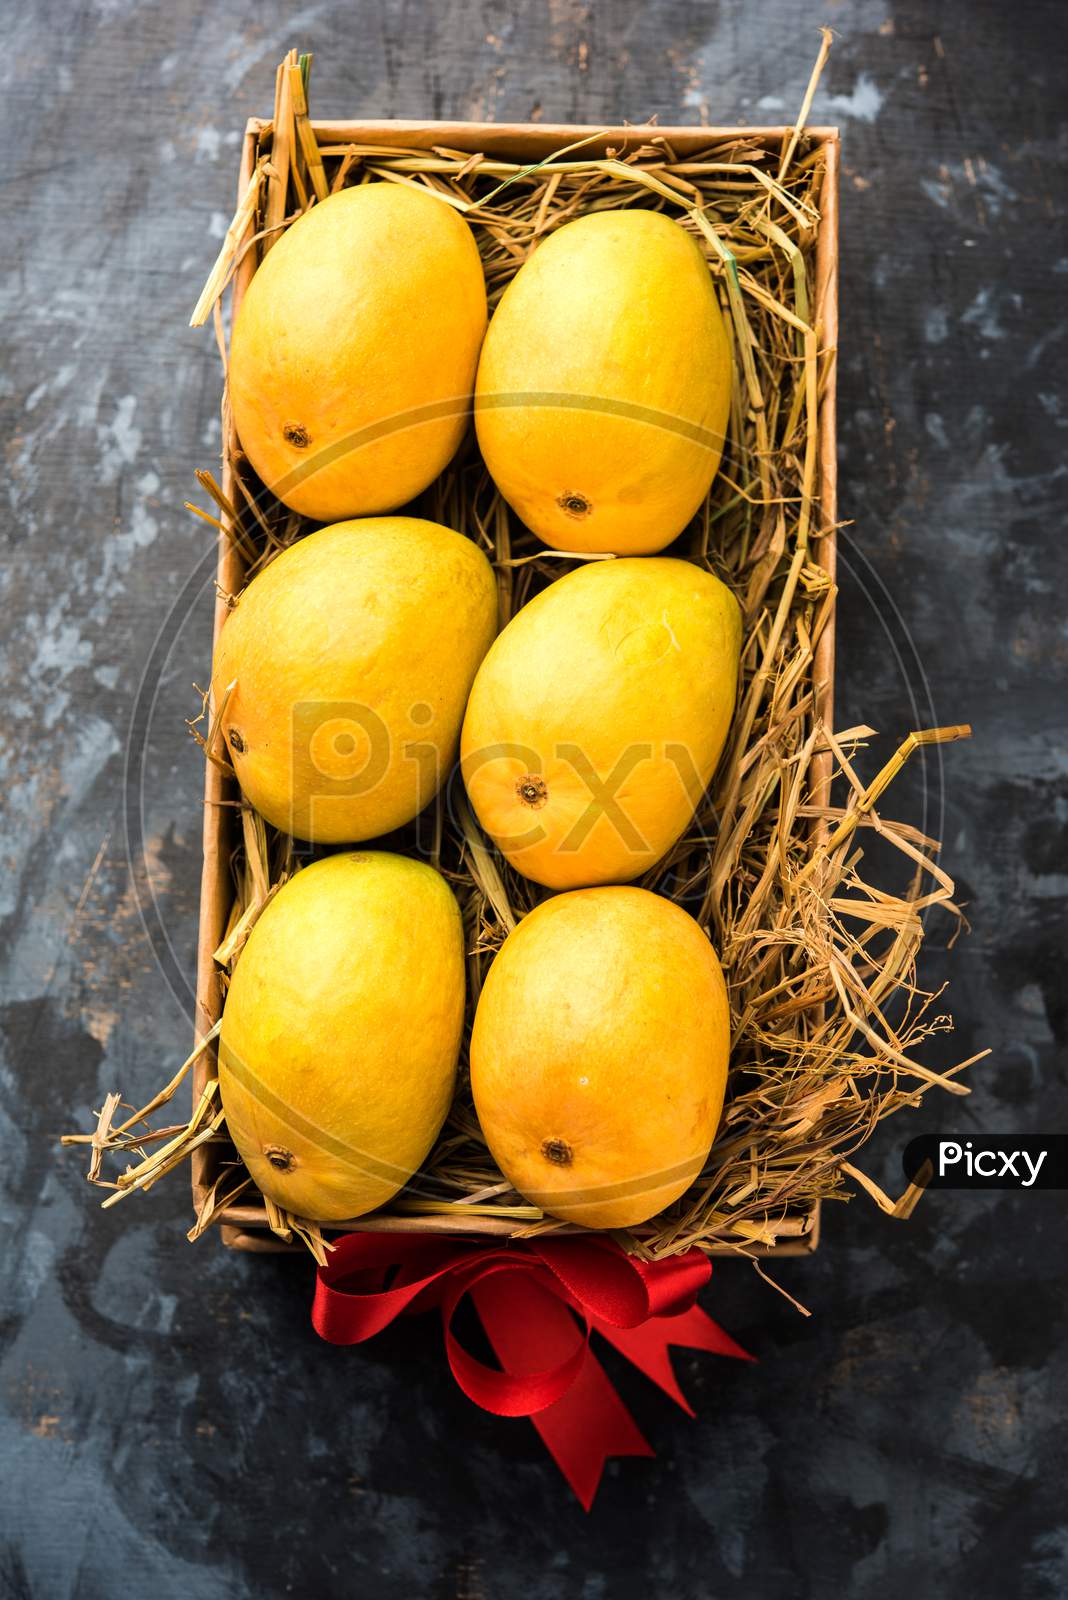 Alphonso mangoes in a gift box